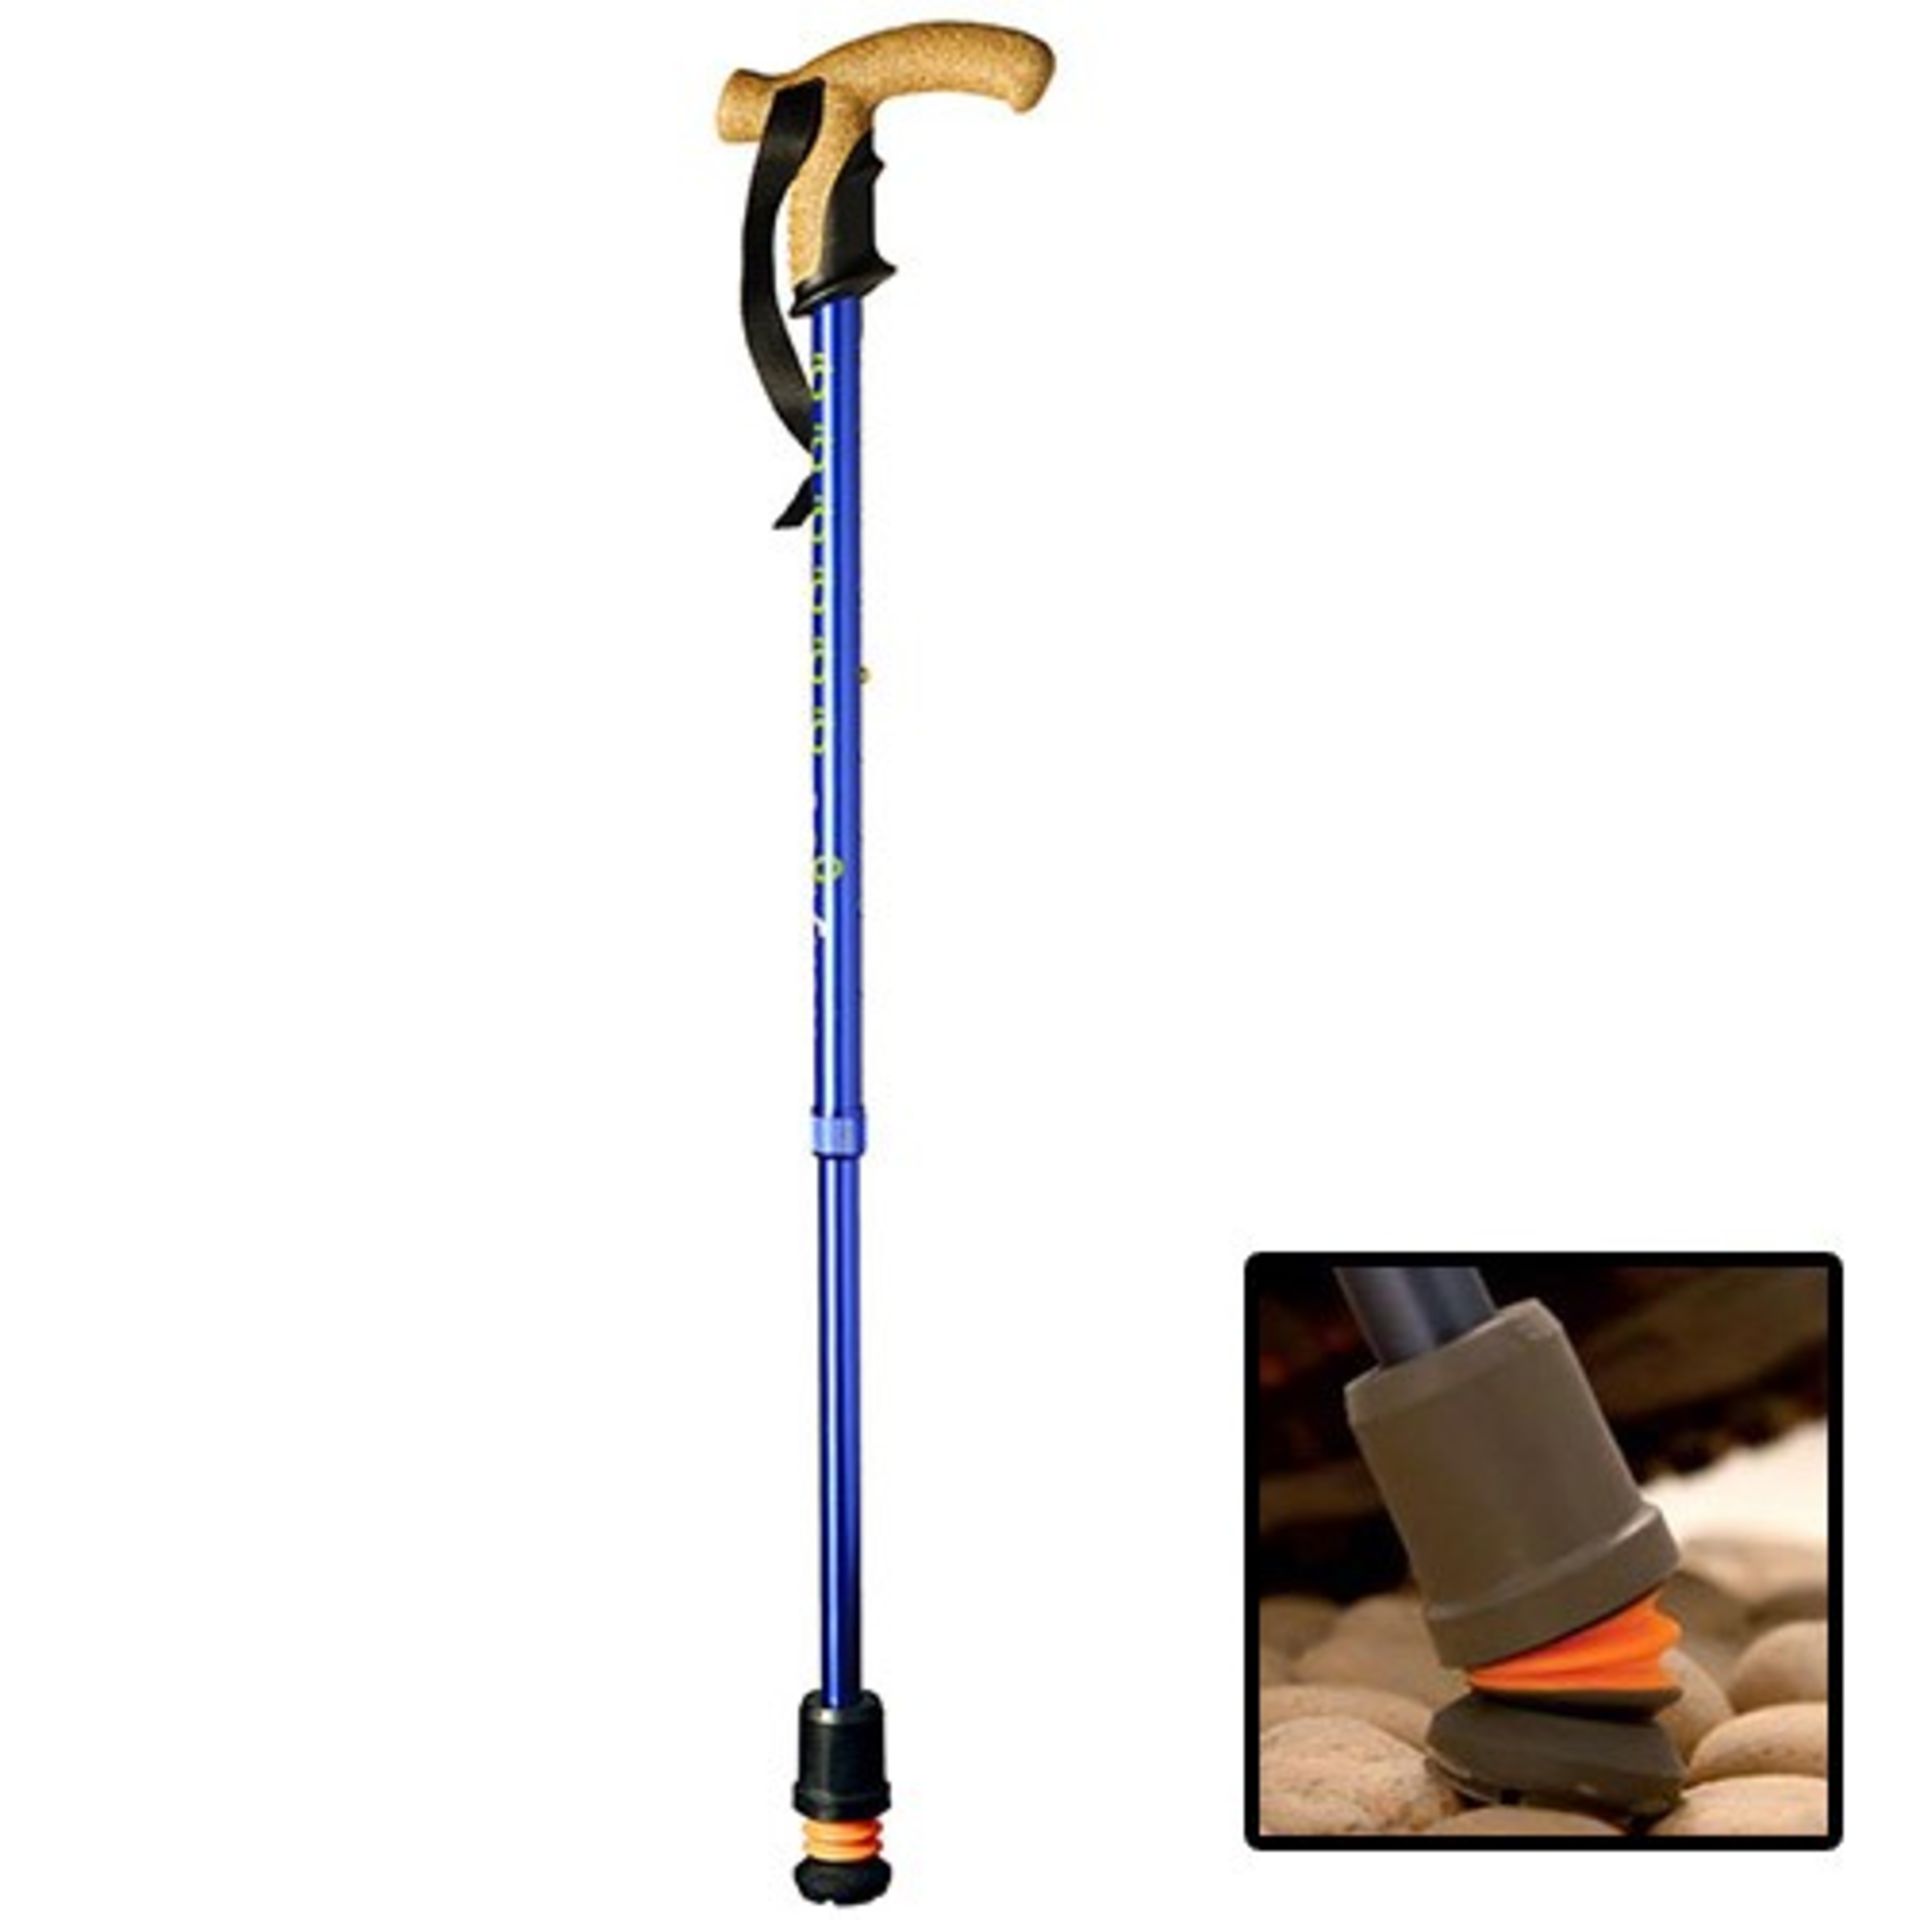 ME : 1 AS NEW BOXED FLEXYFOOT TELESCOPIC ALUMINIUM WALKING STICK - BLUE / RRP £31.14 (VIEWING HIGHLY